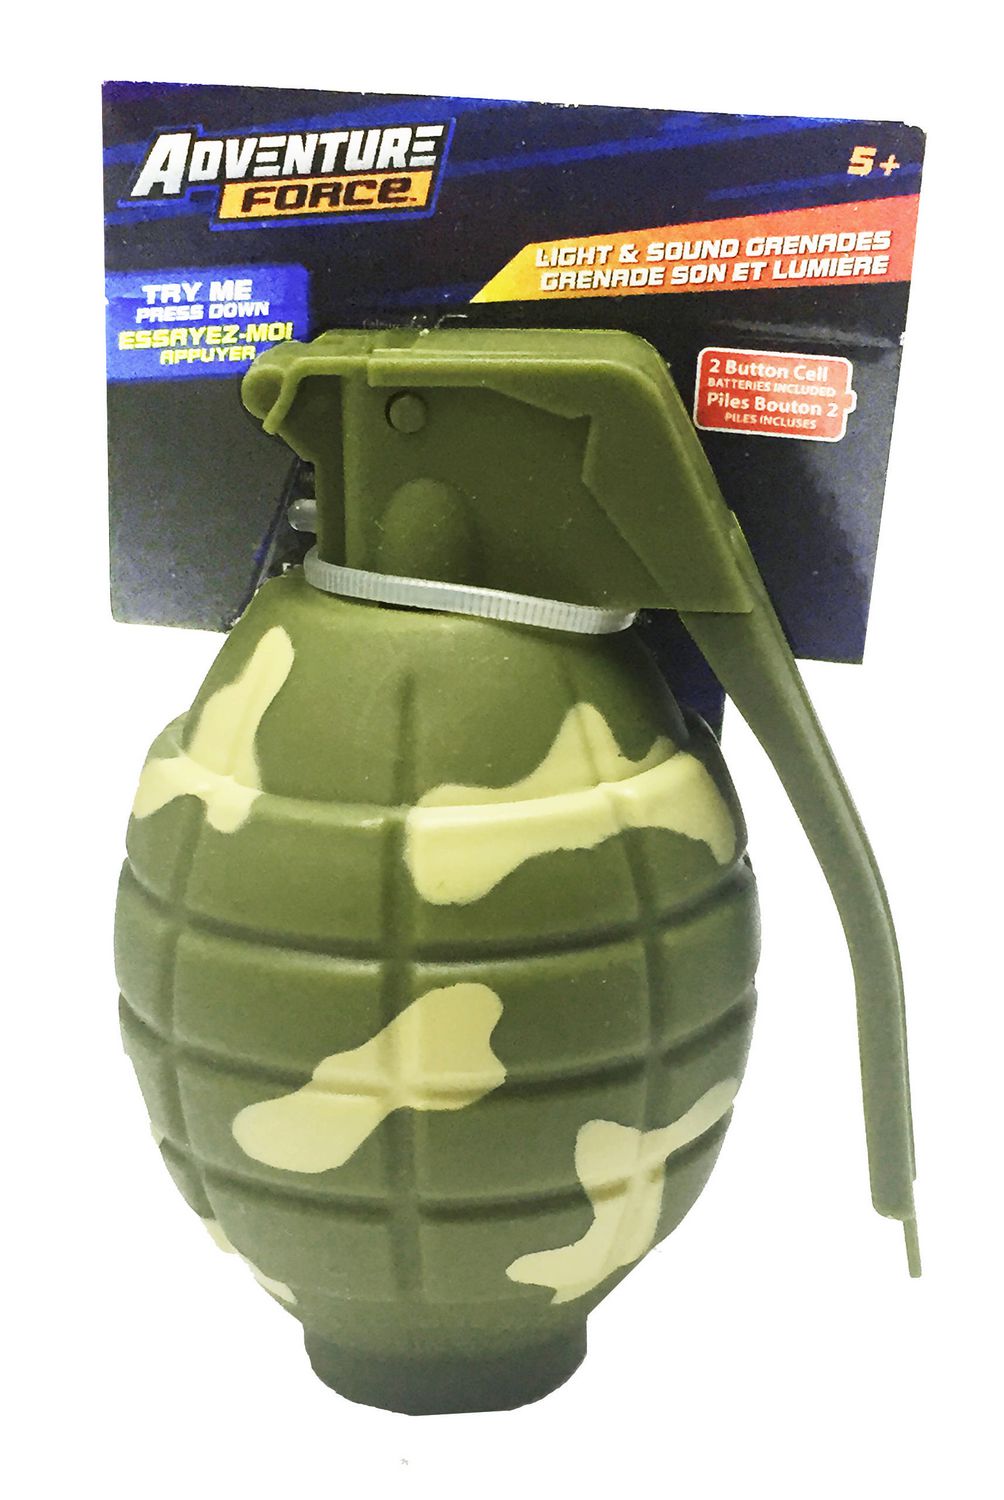 Adventure Force Light And Sound Toy Grenade 